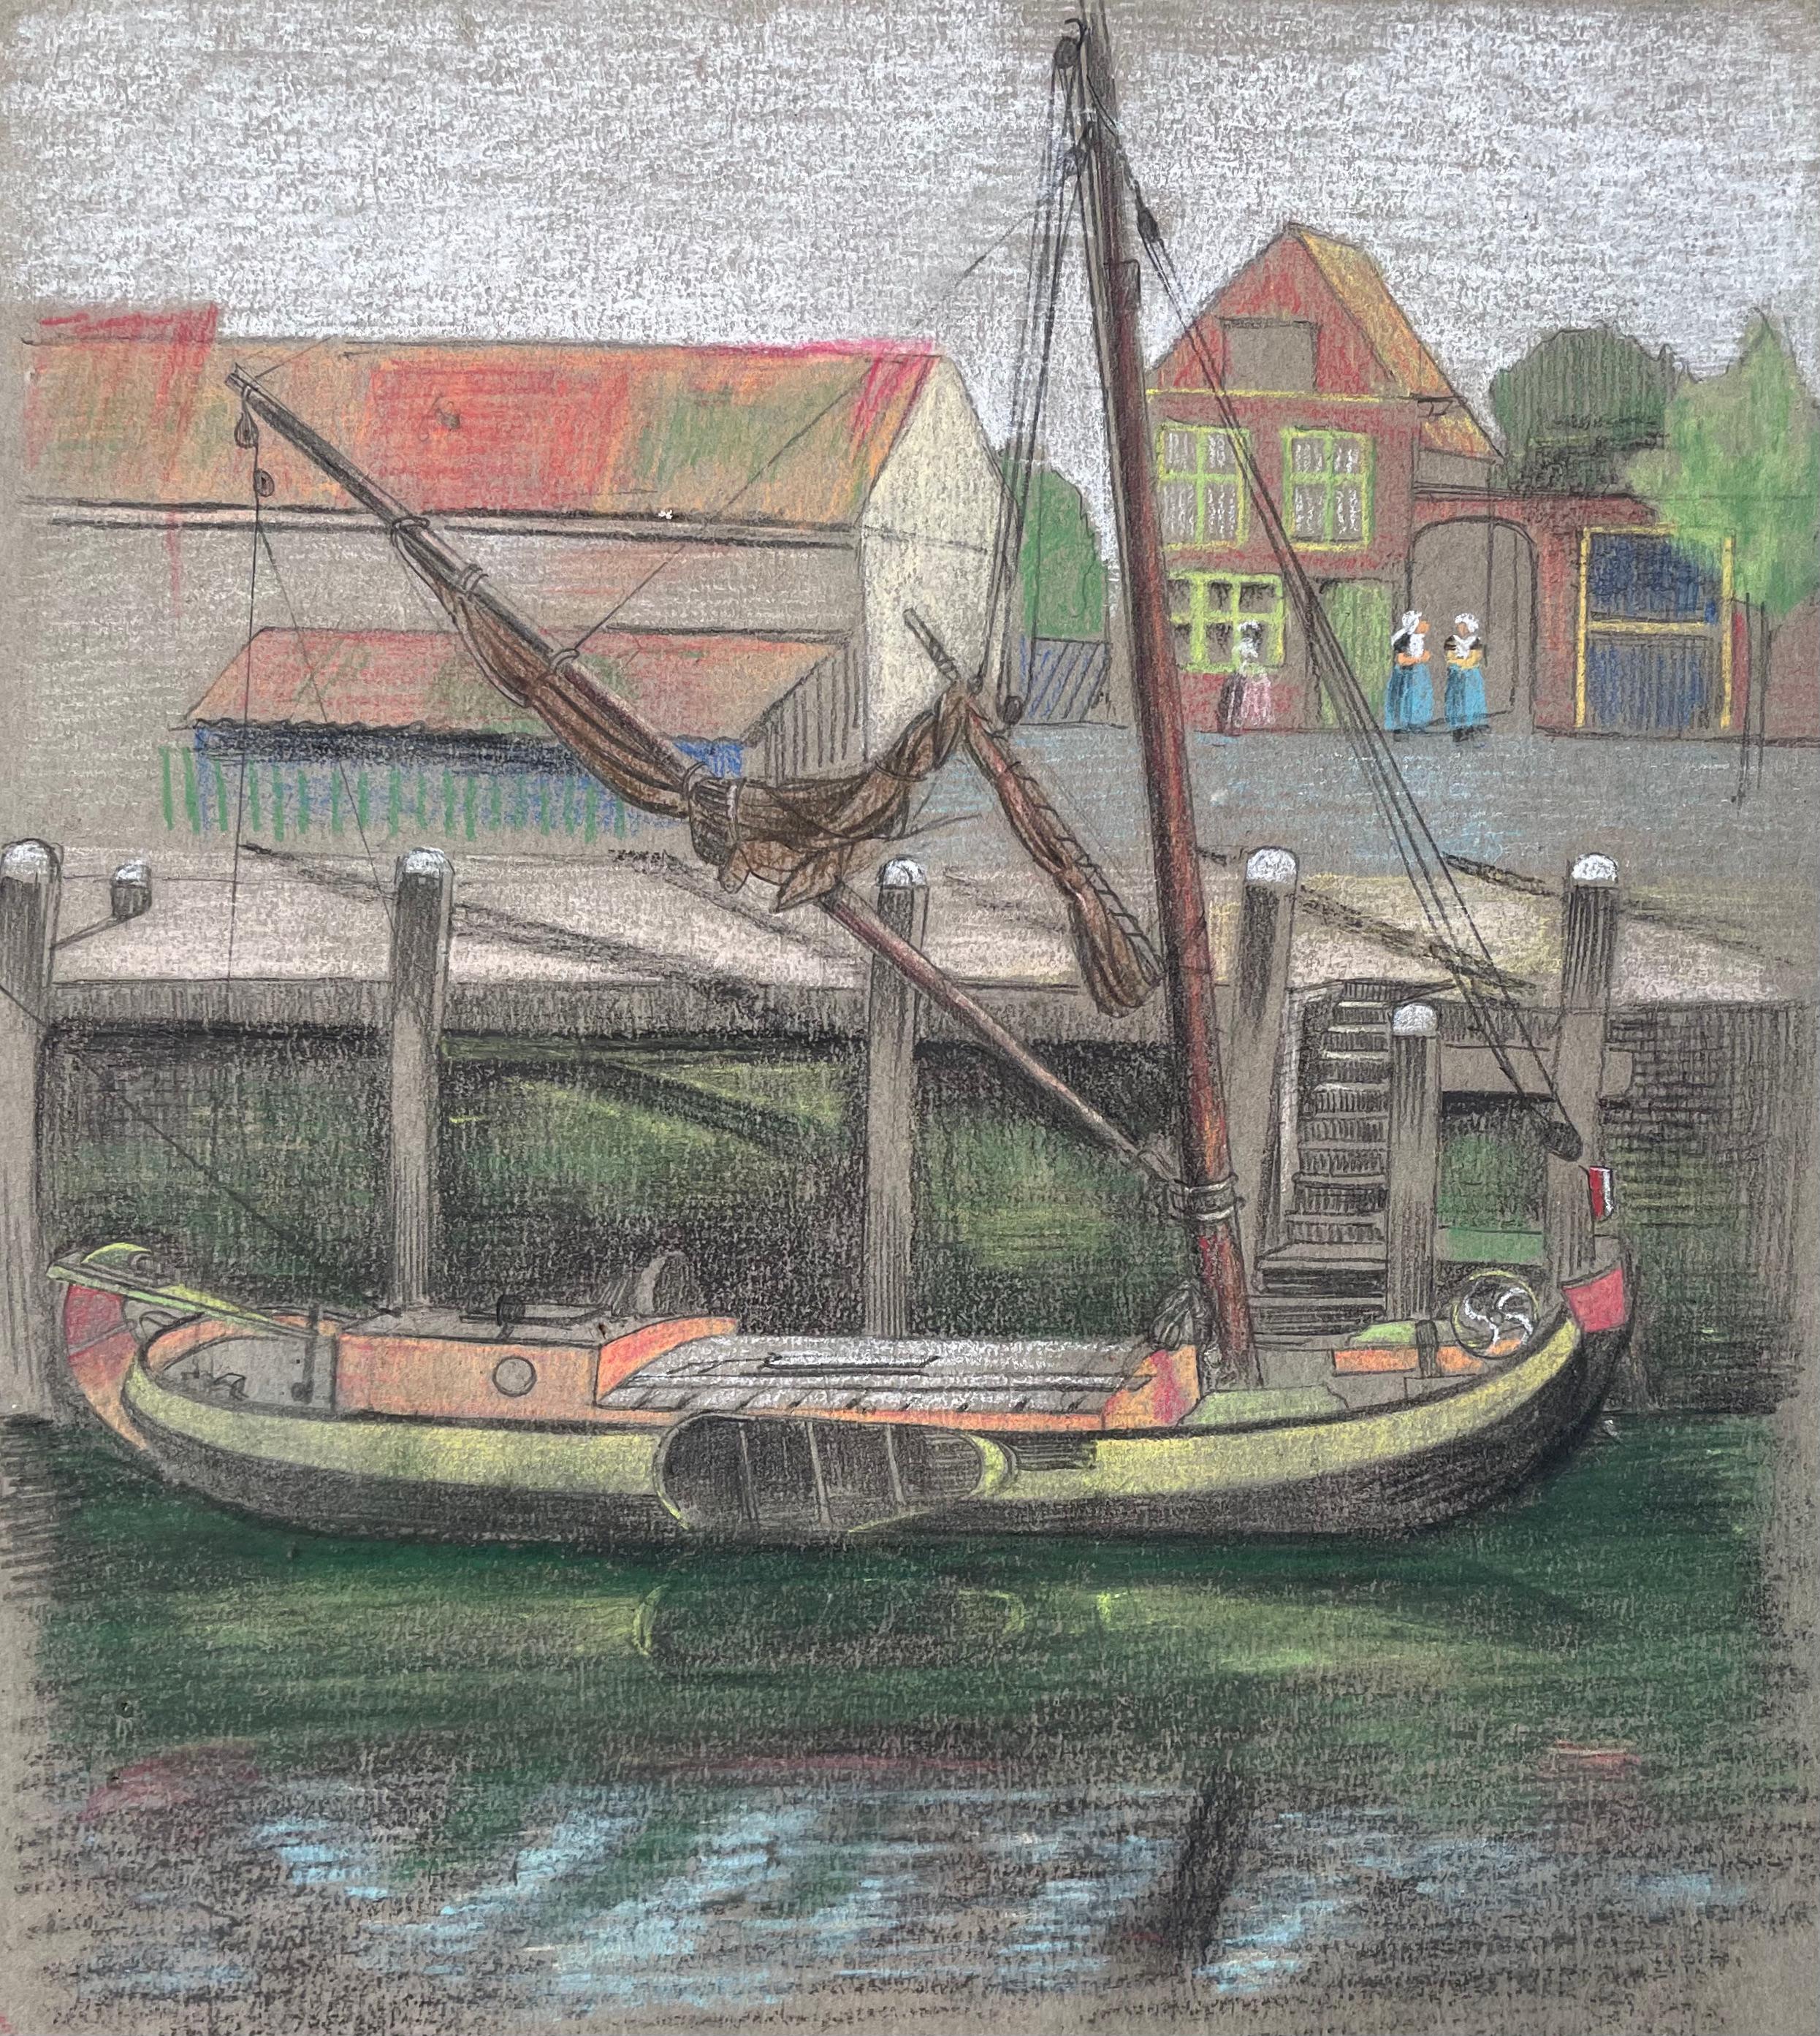 Moored Barges - Arts & Crafts British pastel by Bernard Sleigh